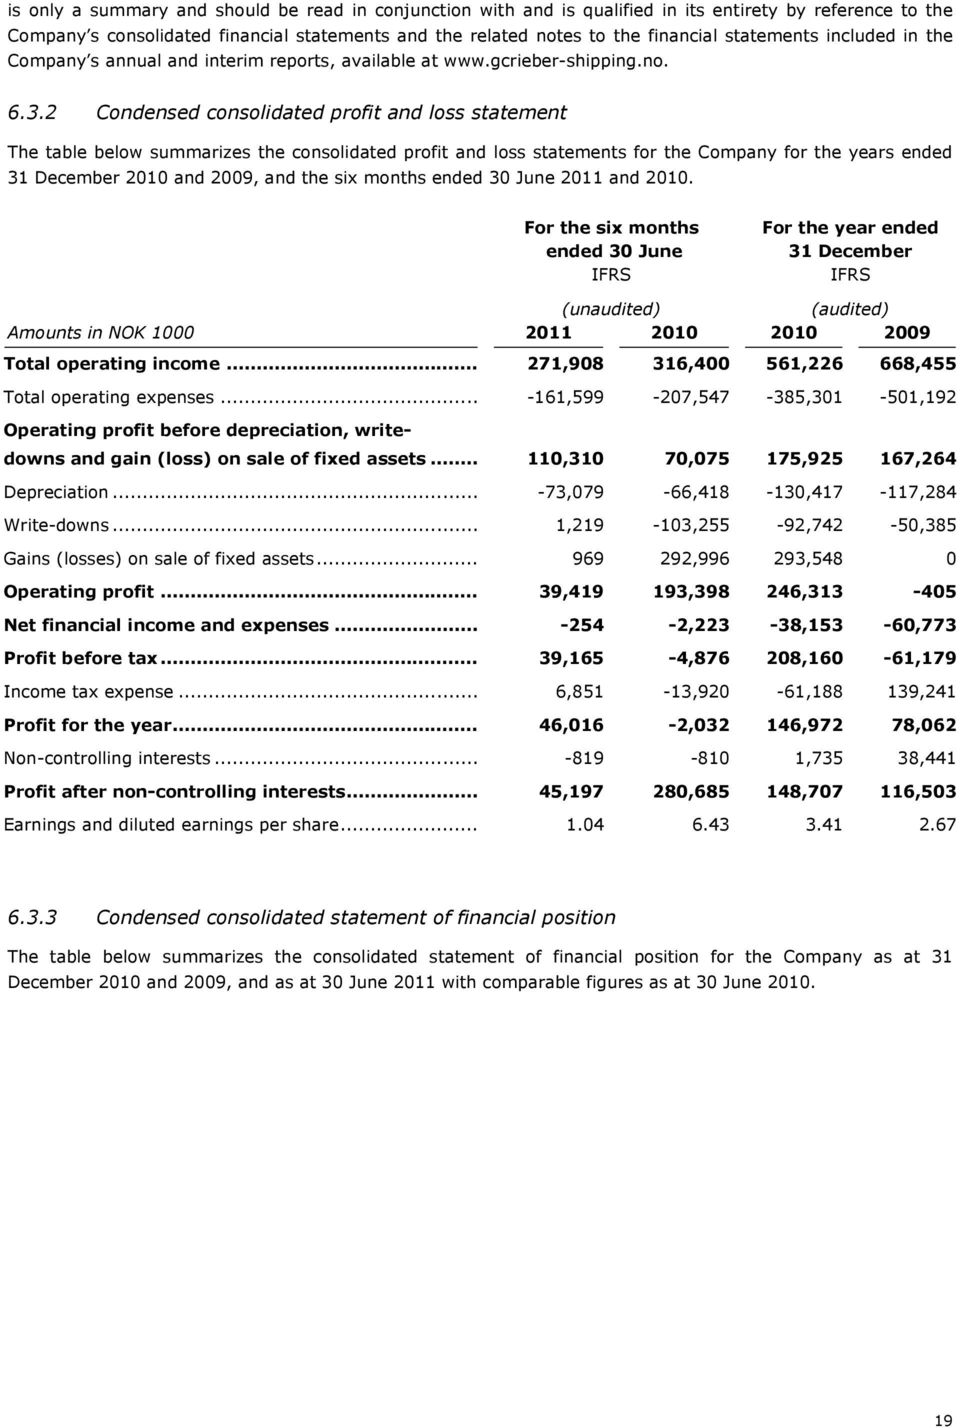 2 Condensed consolidated profit and loss statement The table below summarizes the consolidated profit and loss statements for the Company for the years ended 31 December 2010 and 2009, and the six